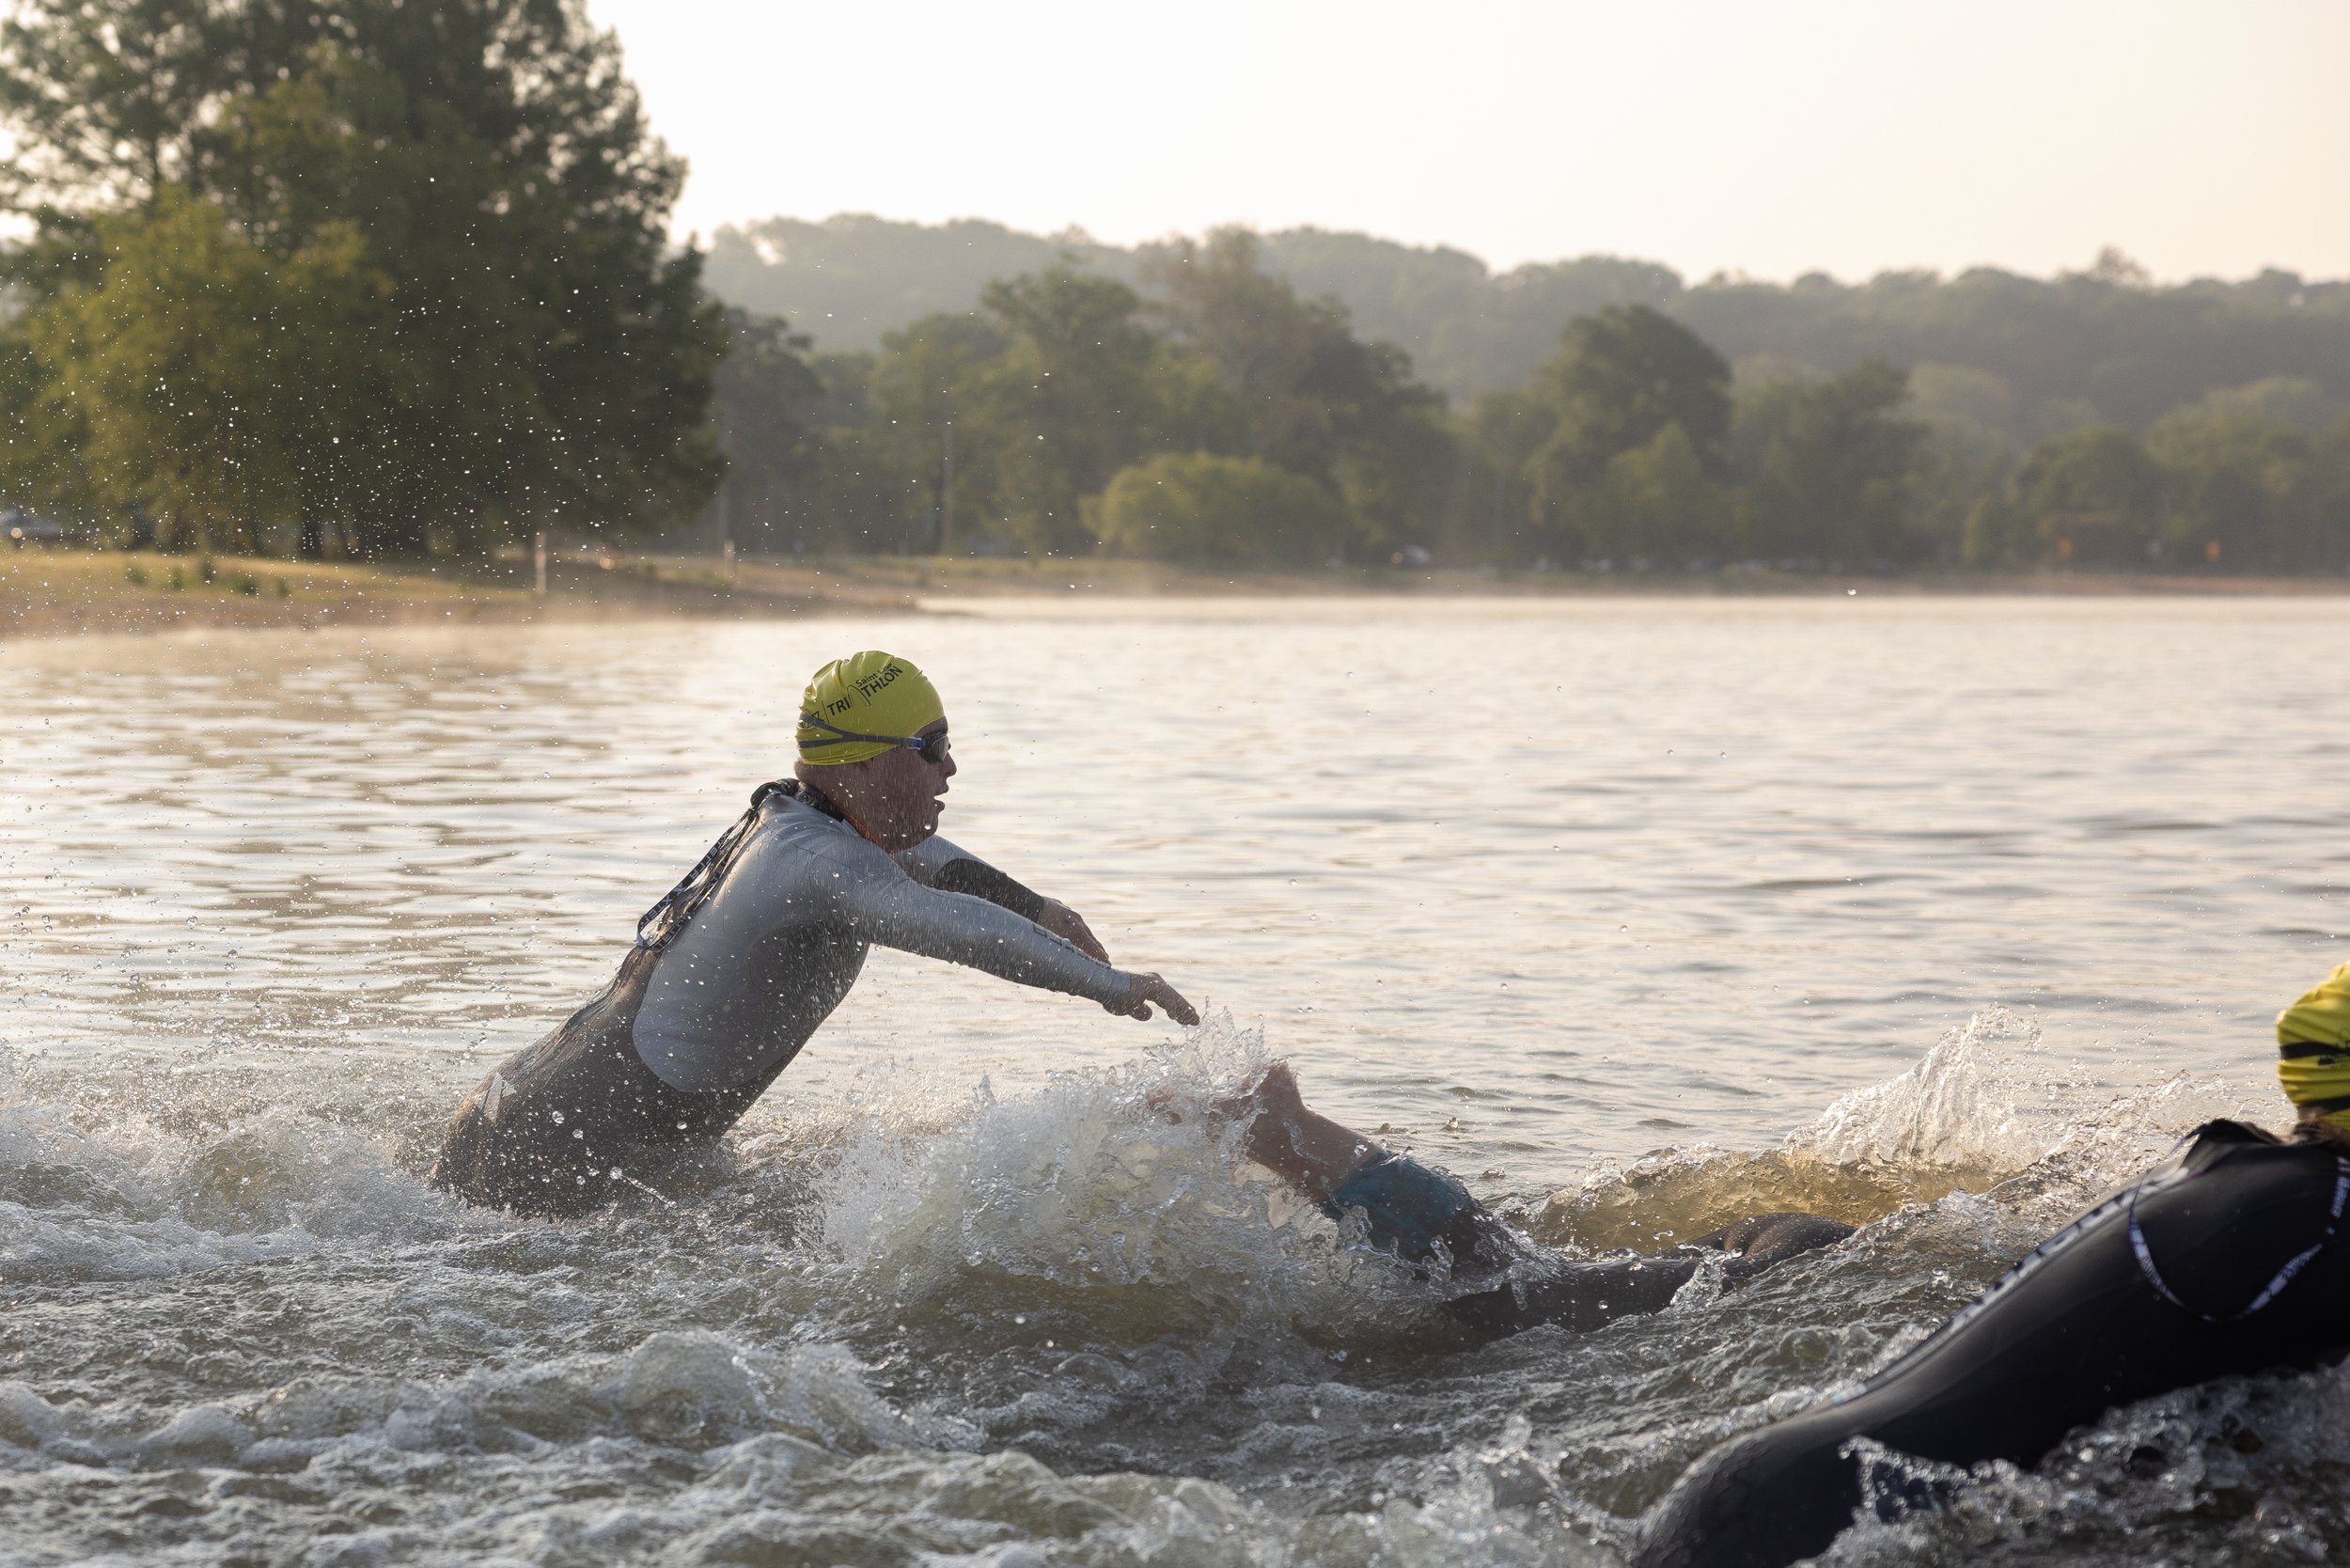  Gabriel Cobb dove into Creve Coeur Lake at the start of his second triathlon of the year May 21 at Creve Coeur Lake in Maryland Heights, Missouri. The 22-year-old triathlete, who also has Down syndrome, has competed in 13 of the athletic events that